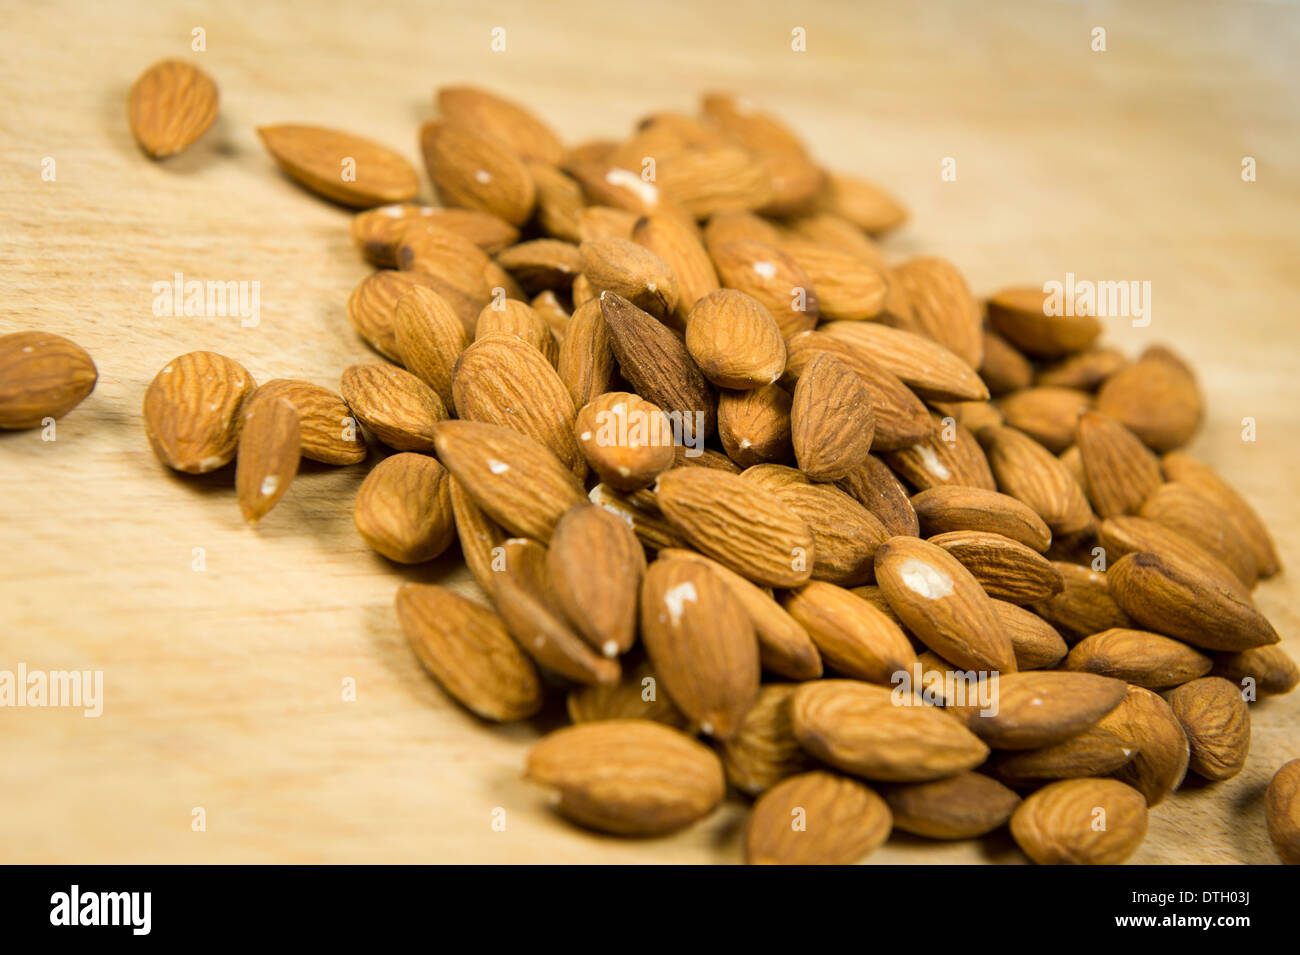 Close up photograph of shelled almonds on a wooden chopping board. Stock Photo